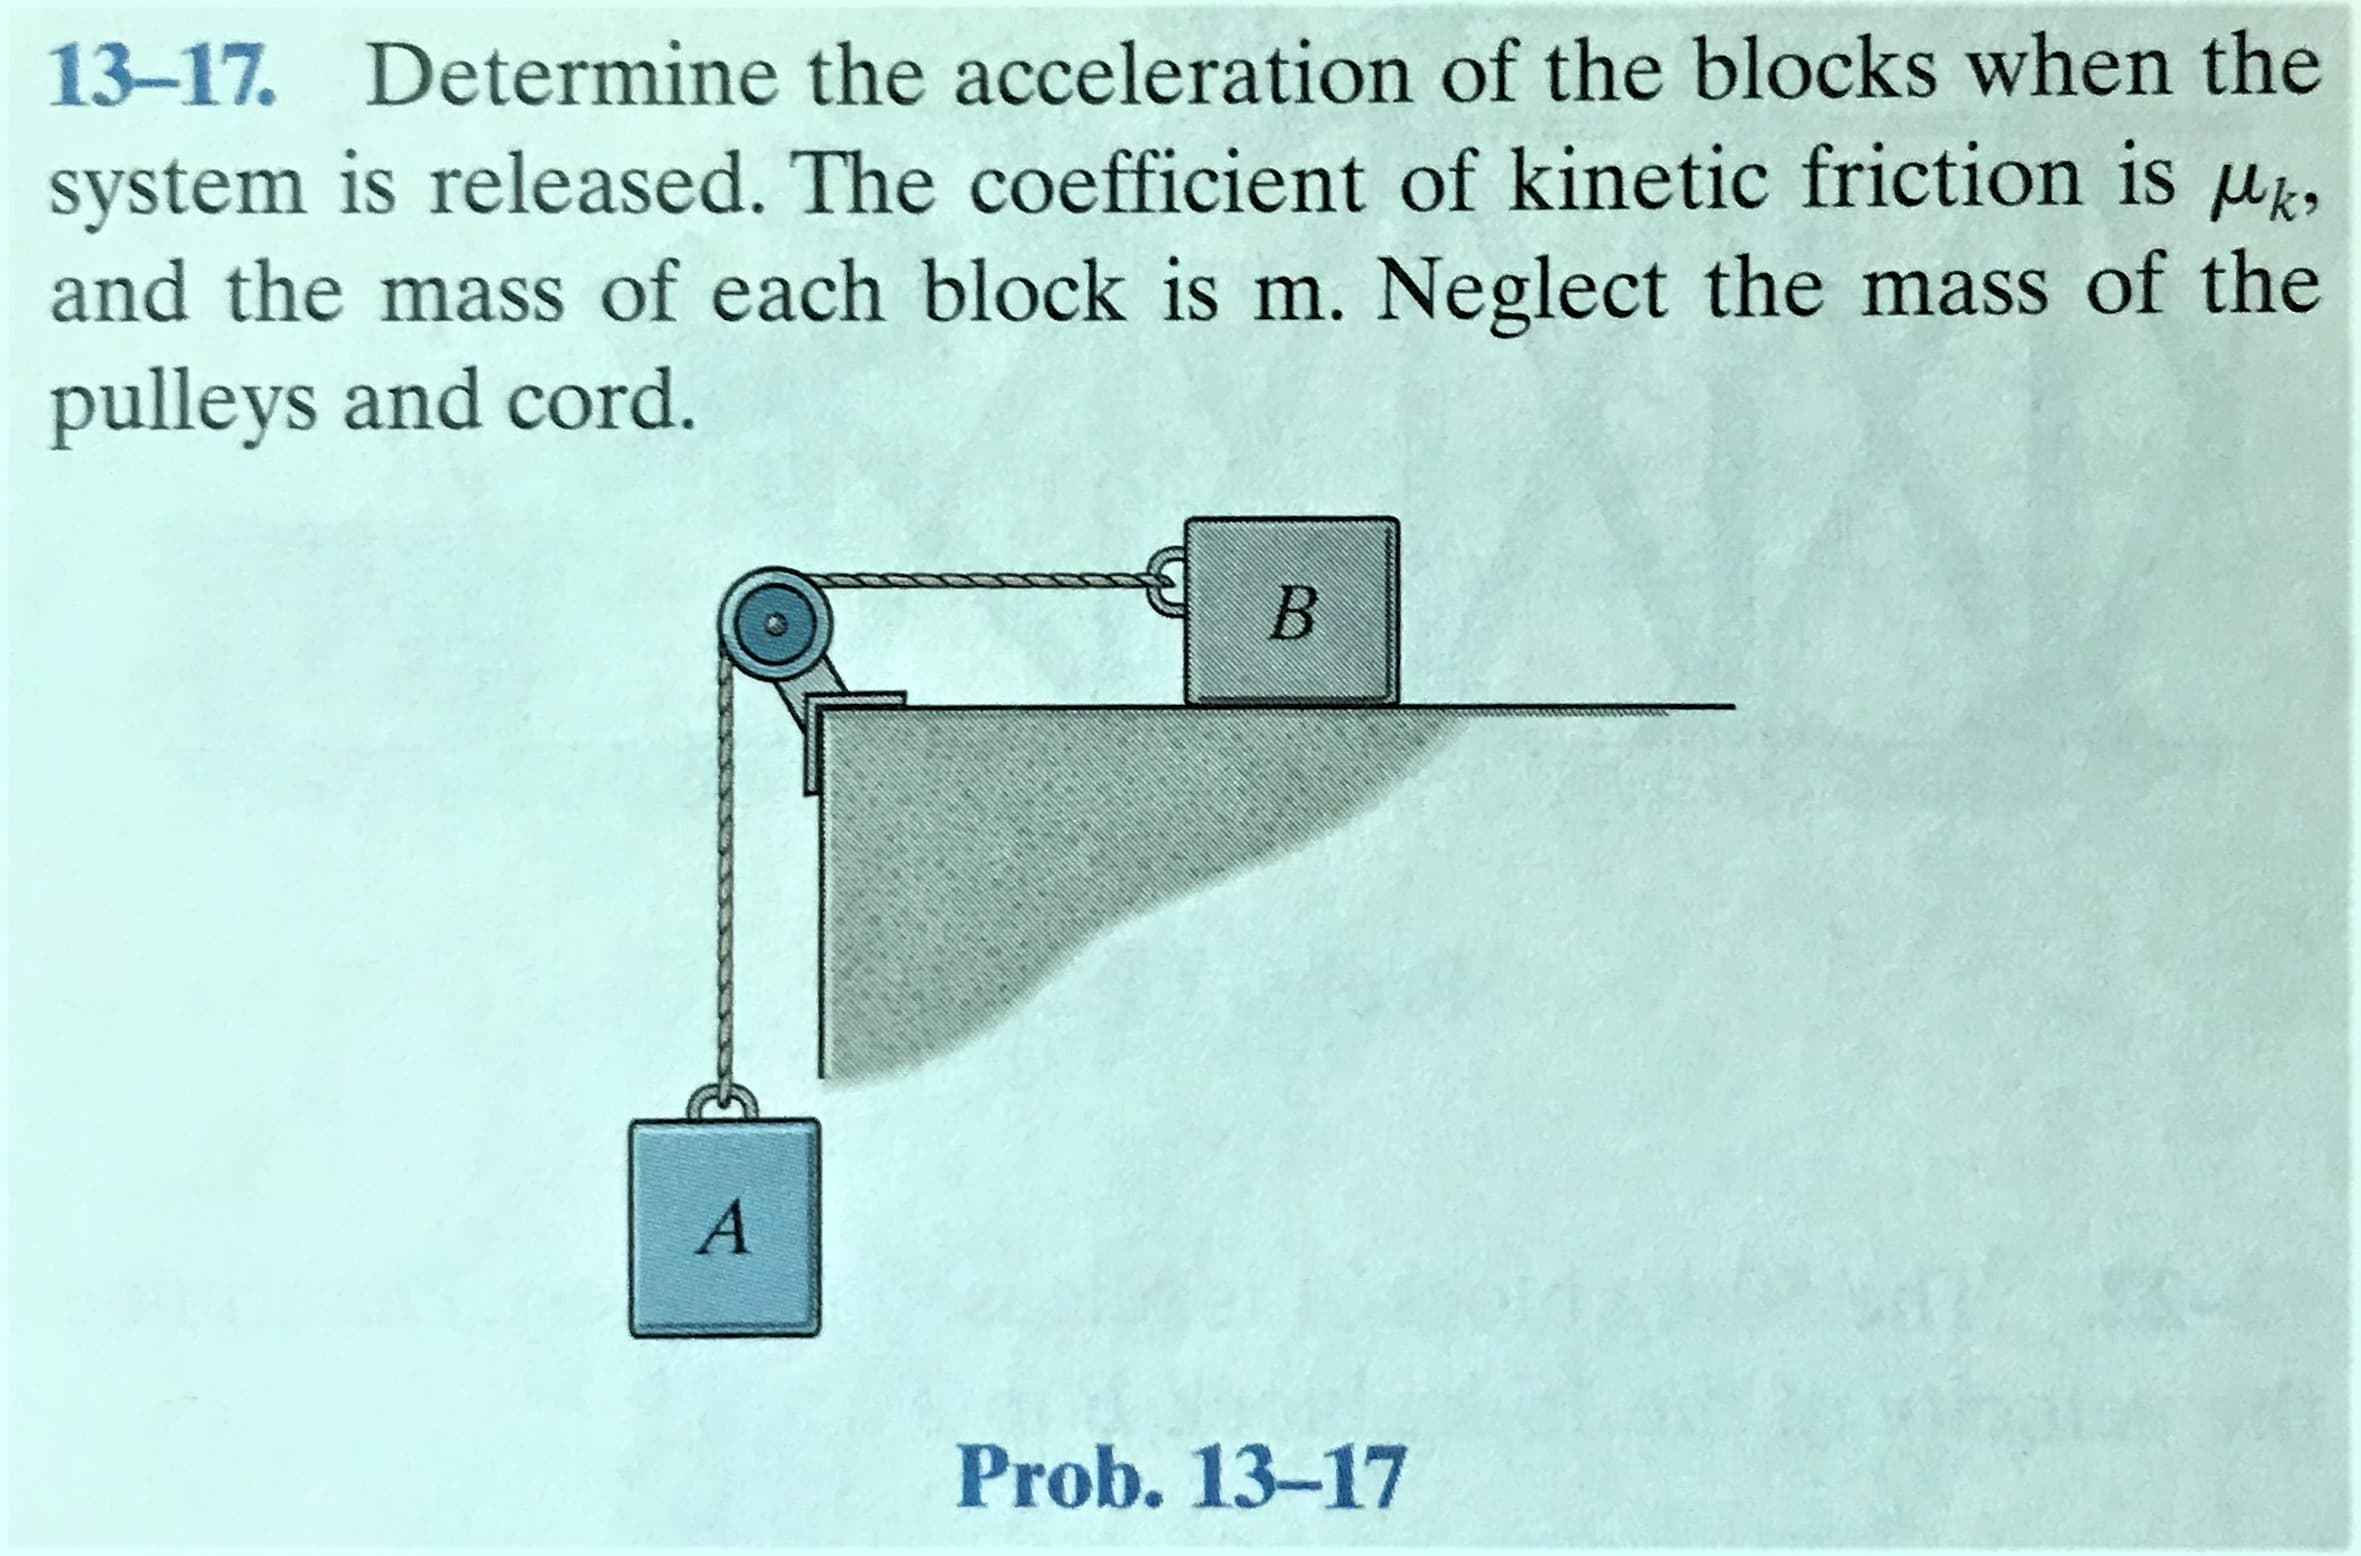 Determine the acceleration of the blocks when the
13-17.
system is released. The coefficient of kinetic friction is u,
and the mass of each block is m. Neglect the mass of the
pulleys and cord.
B
Prob. 13-17
